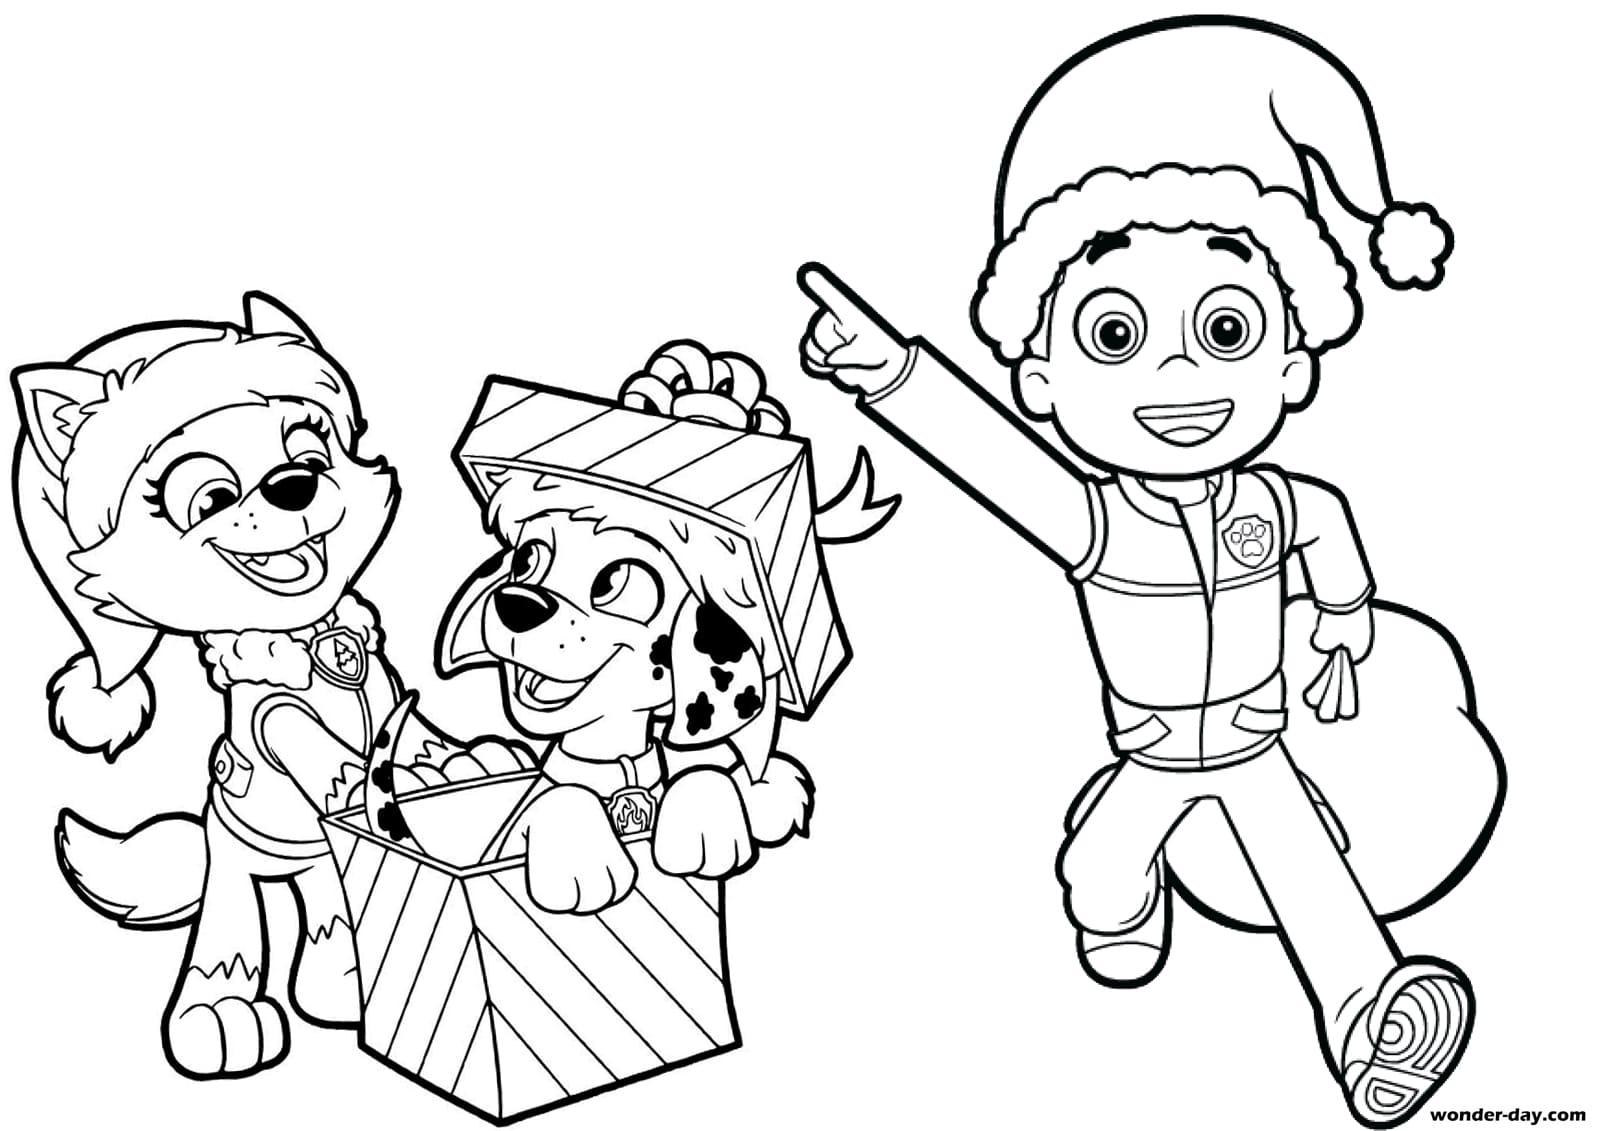 Happy New Year Coloring Pages. Print for free   WONDER DAY ...